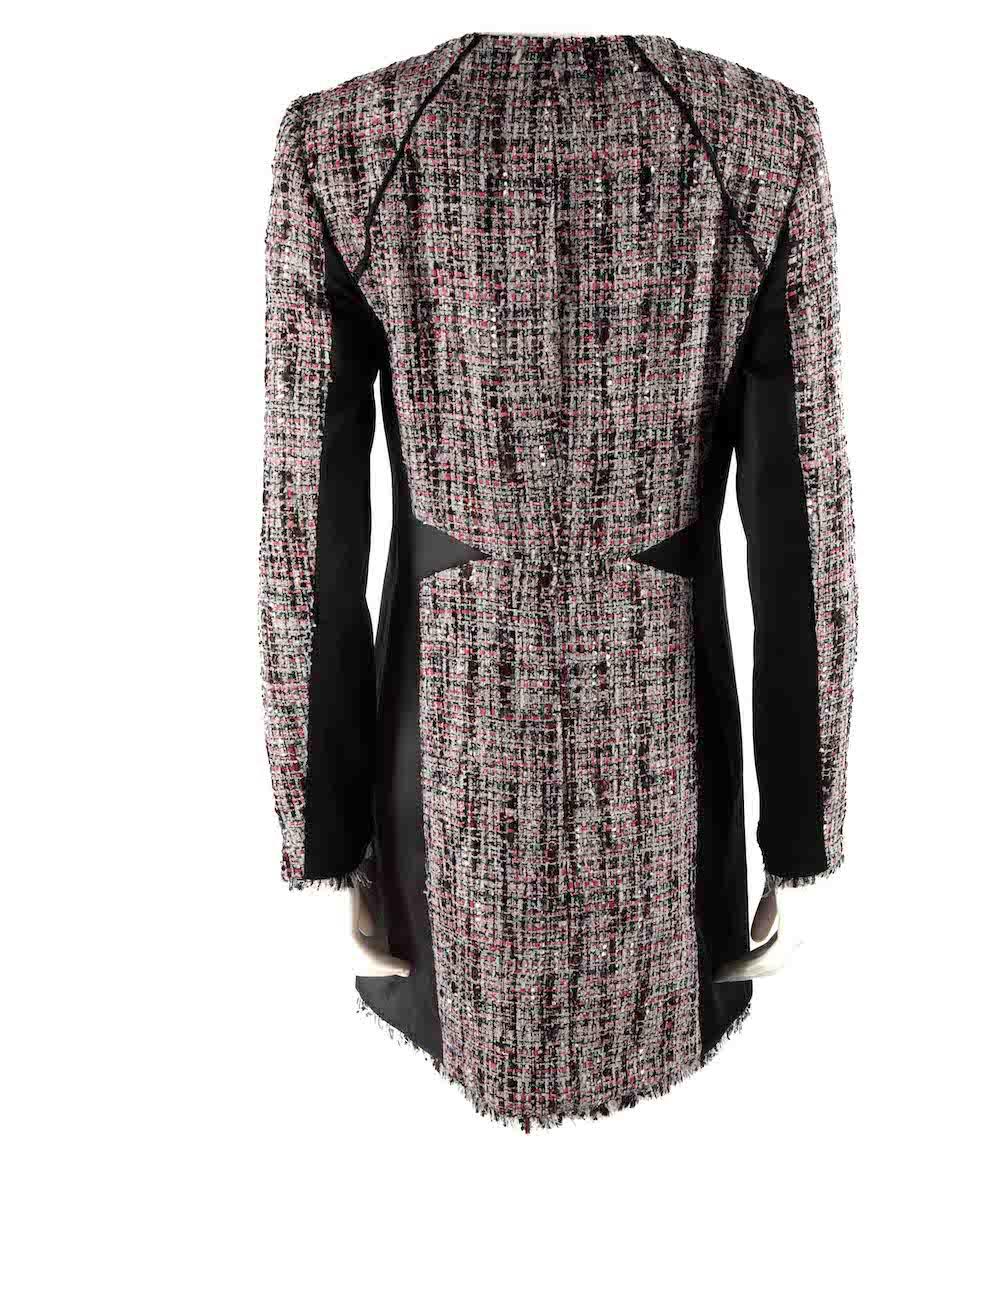 Karl Lagerfeld Tweed Bouclé Panelled Coat Size M In Good Condition For Sale In London, GB